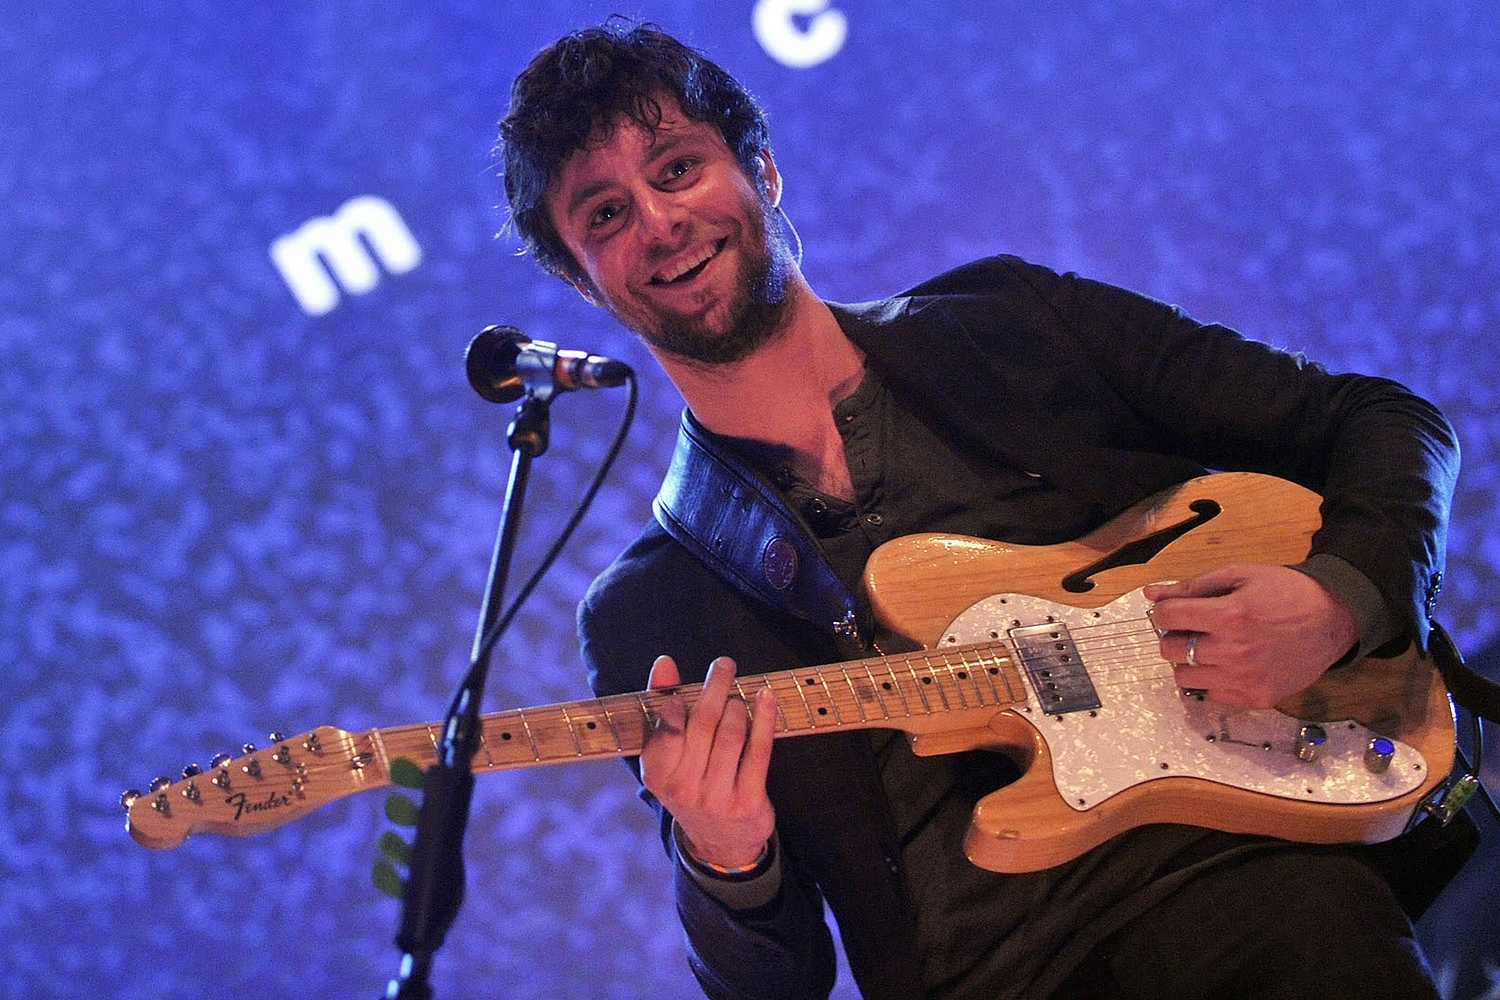 The Maccabees’ Felix White steps in for injured Yannis for Foals’ Mercury Prize performance